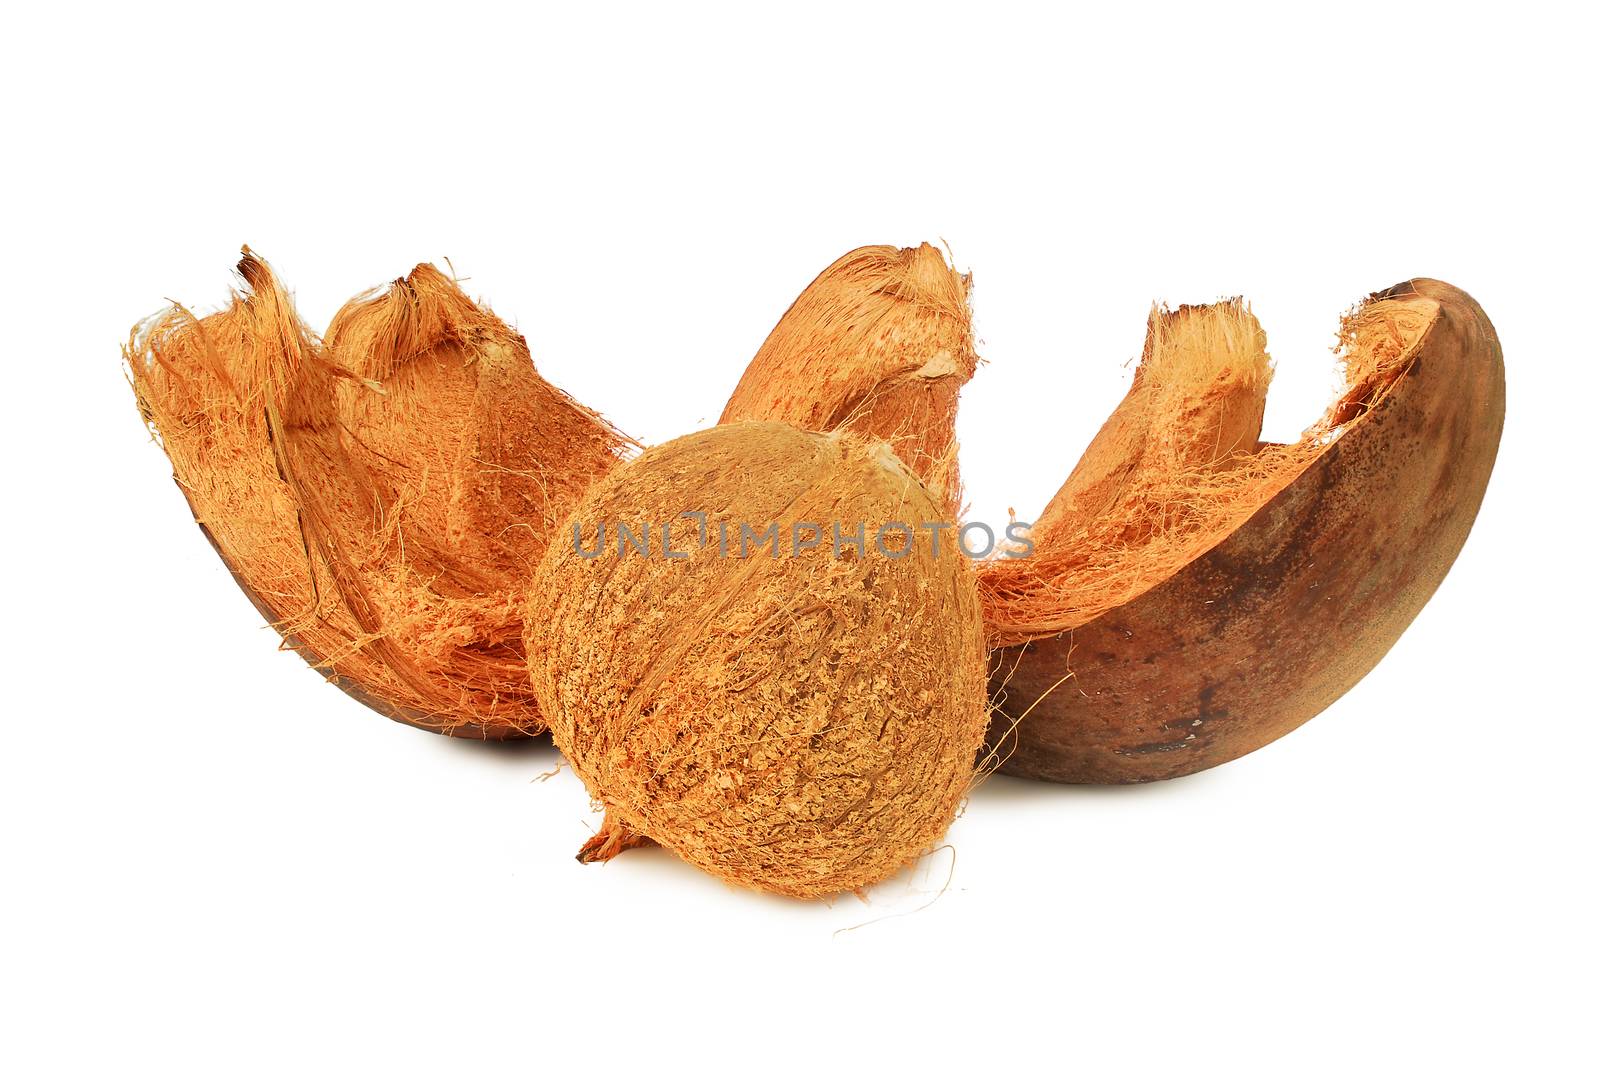 Dried coconut on white background.